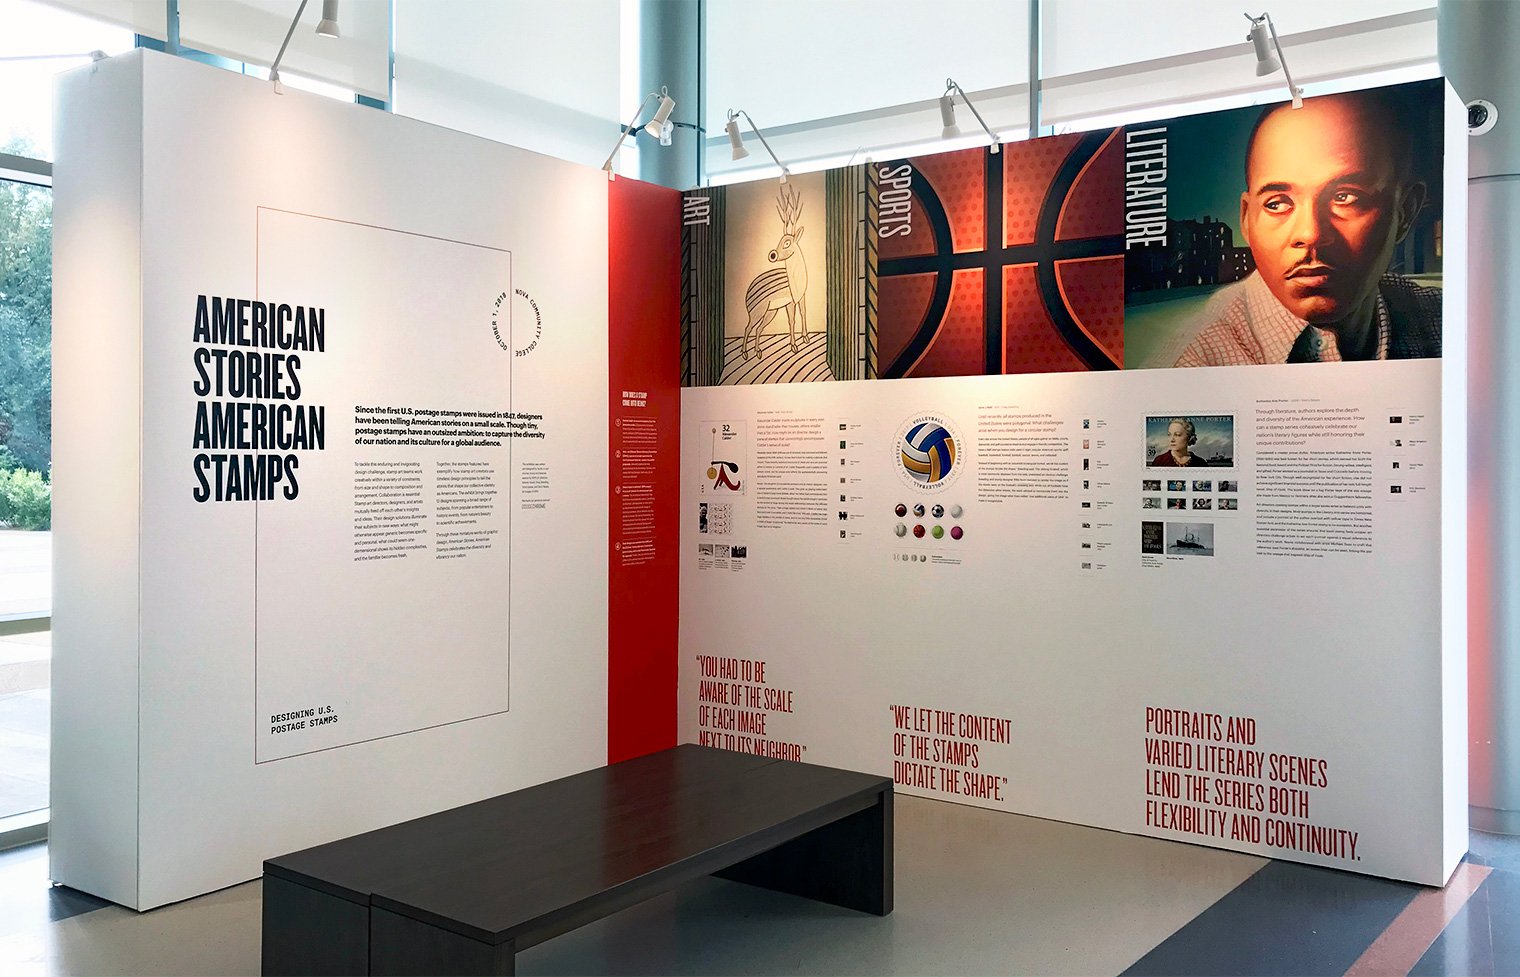 These panels highlight Art, Sports, and Literature like artist Martin Ramiré, basketball, and author Ralph Ellison.